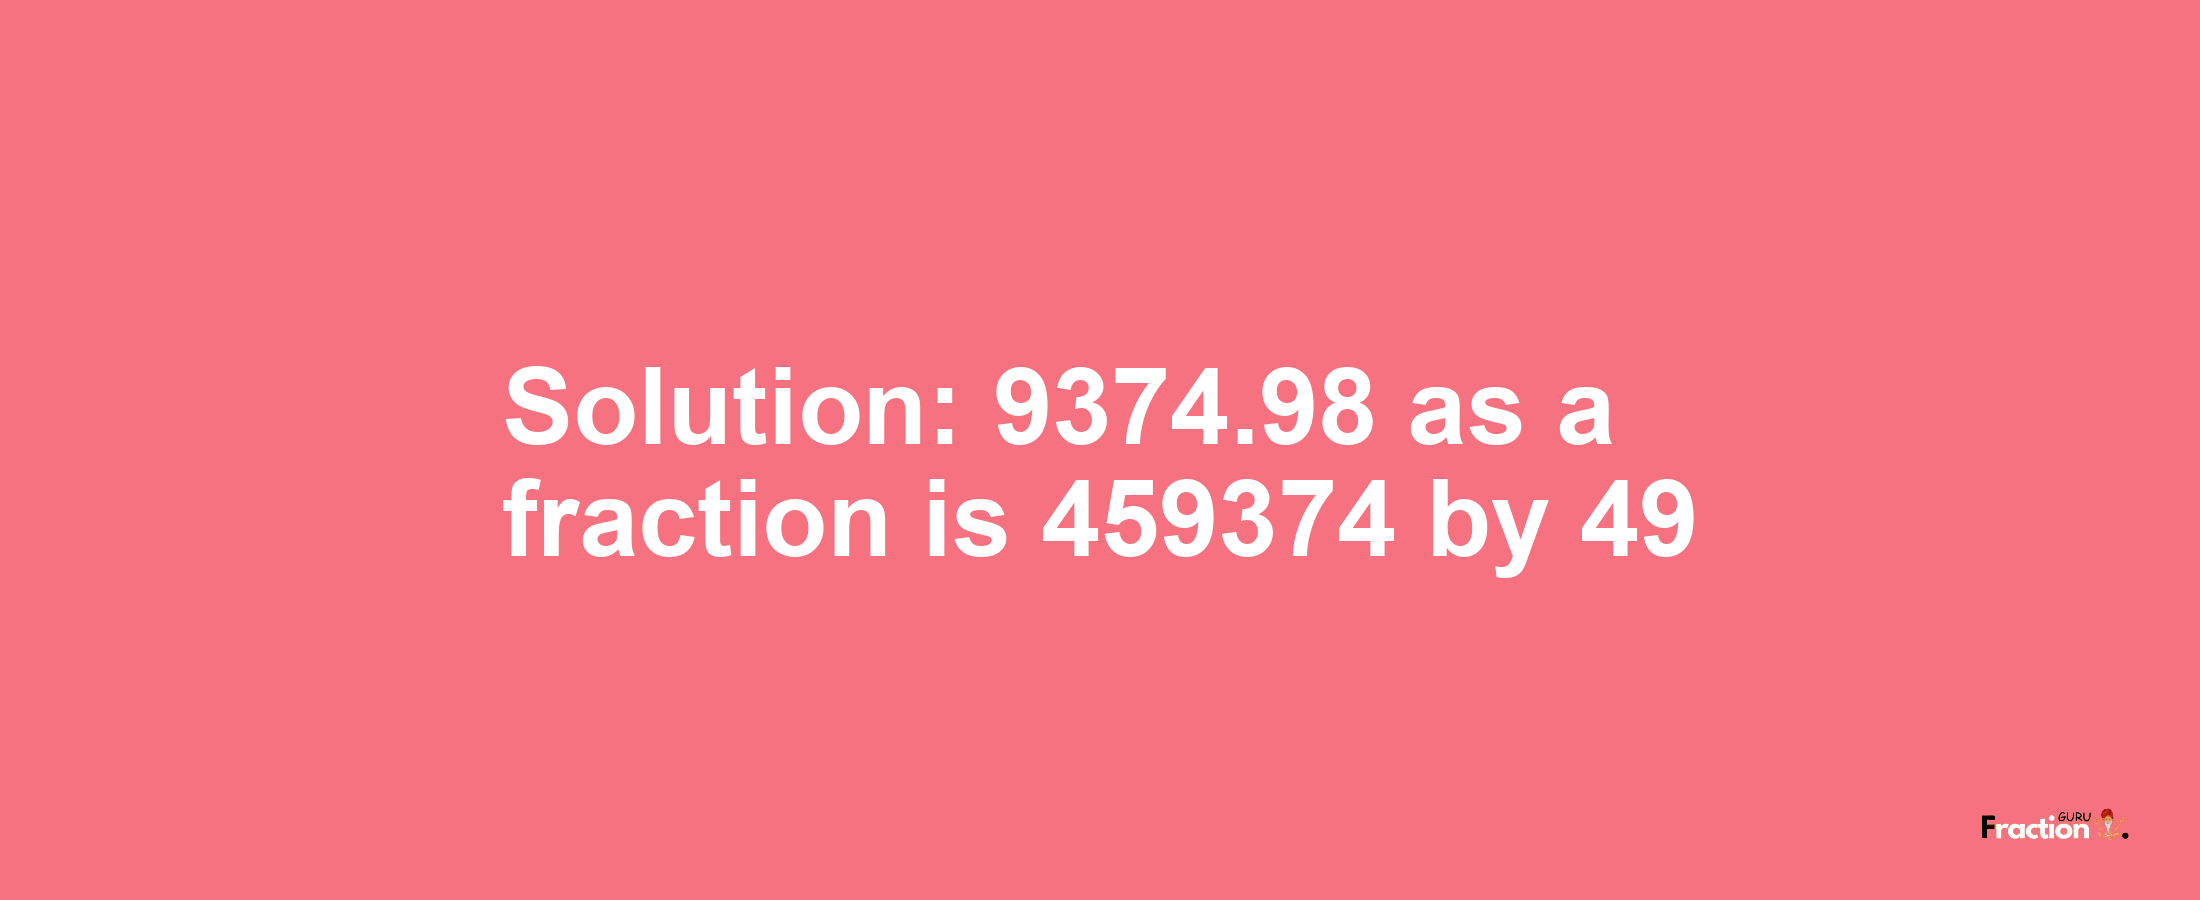 Solution:9374.98 as a fraction is 459374/49